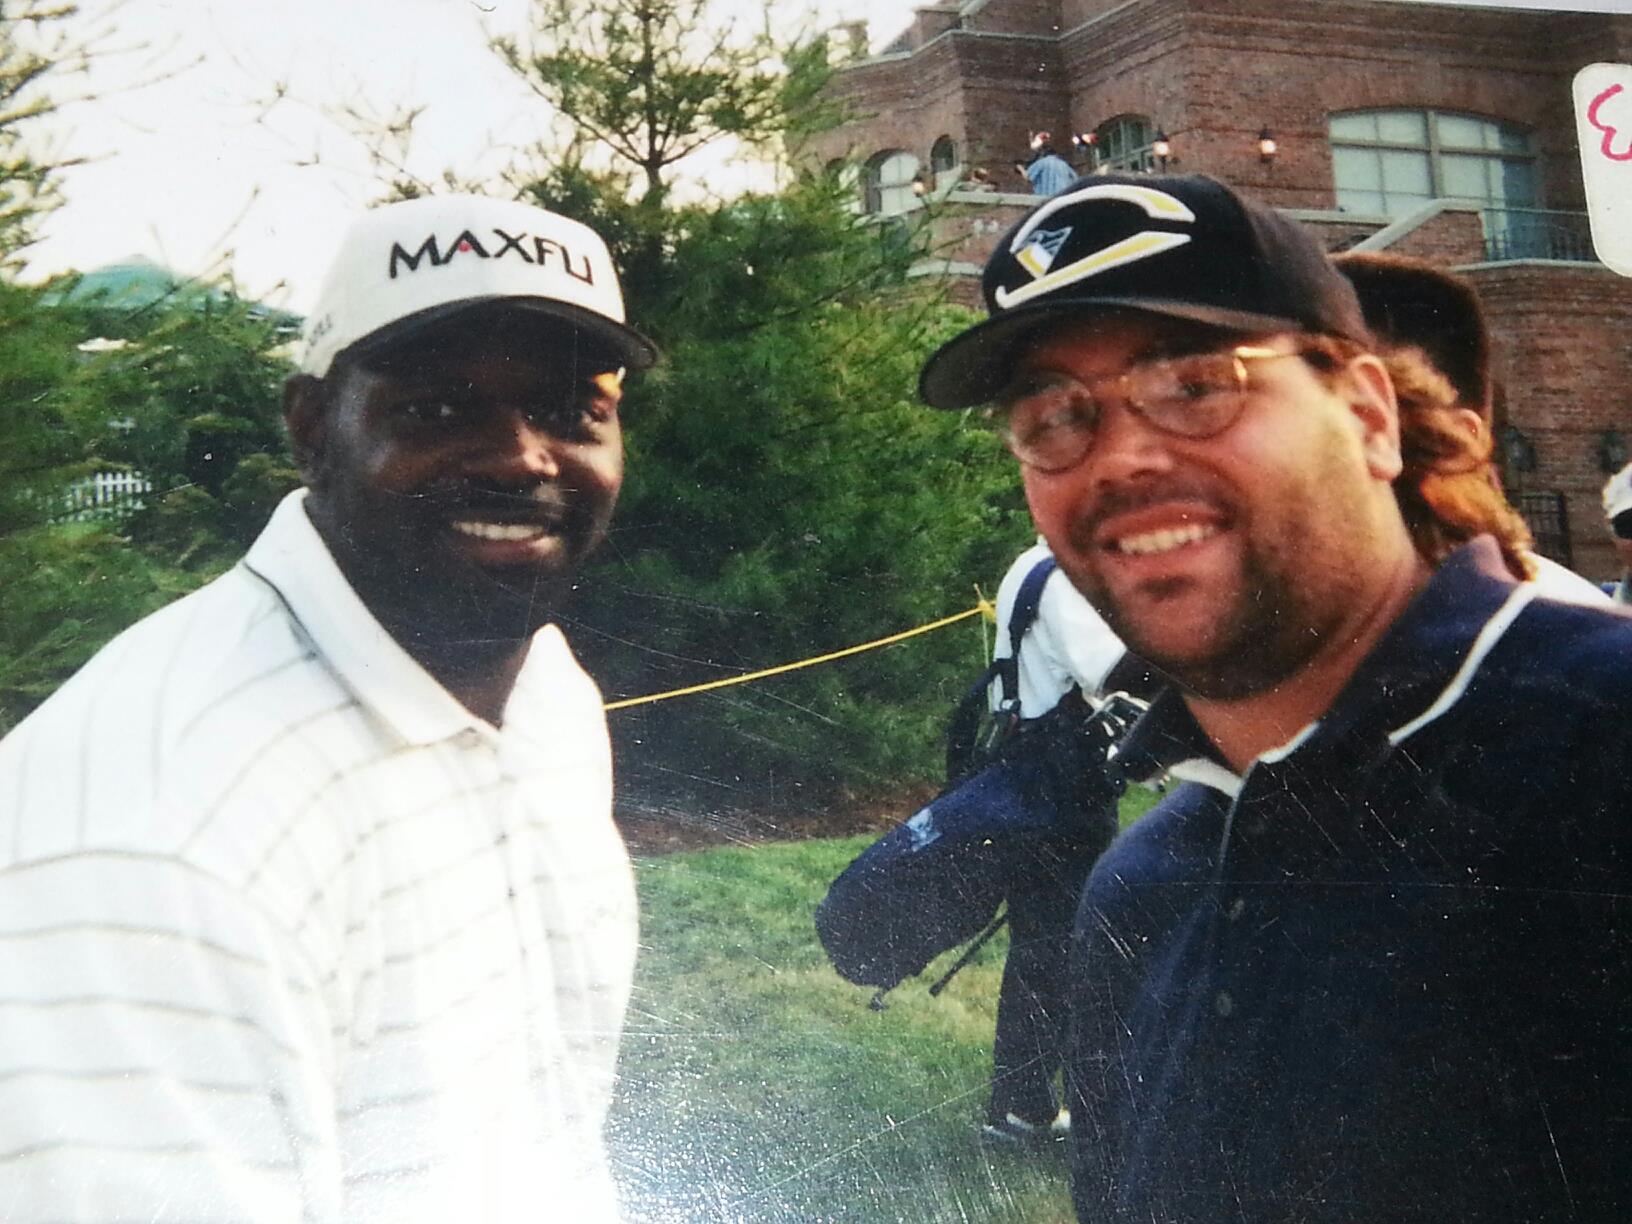 Me and Emmitt Smith at a golf outing in Pa.